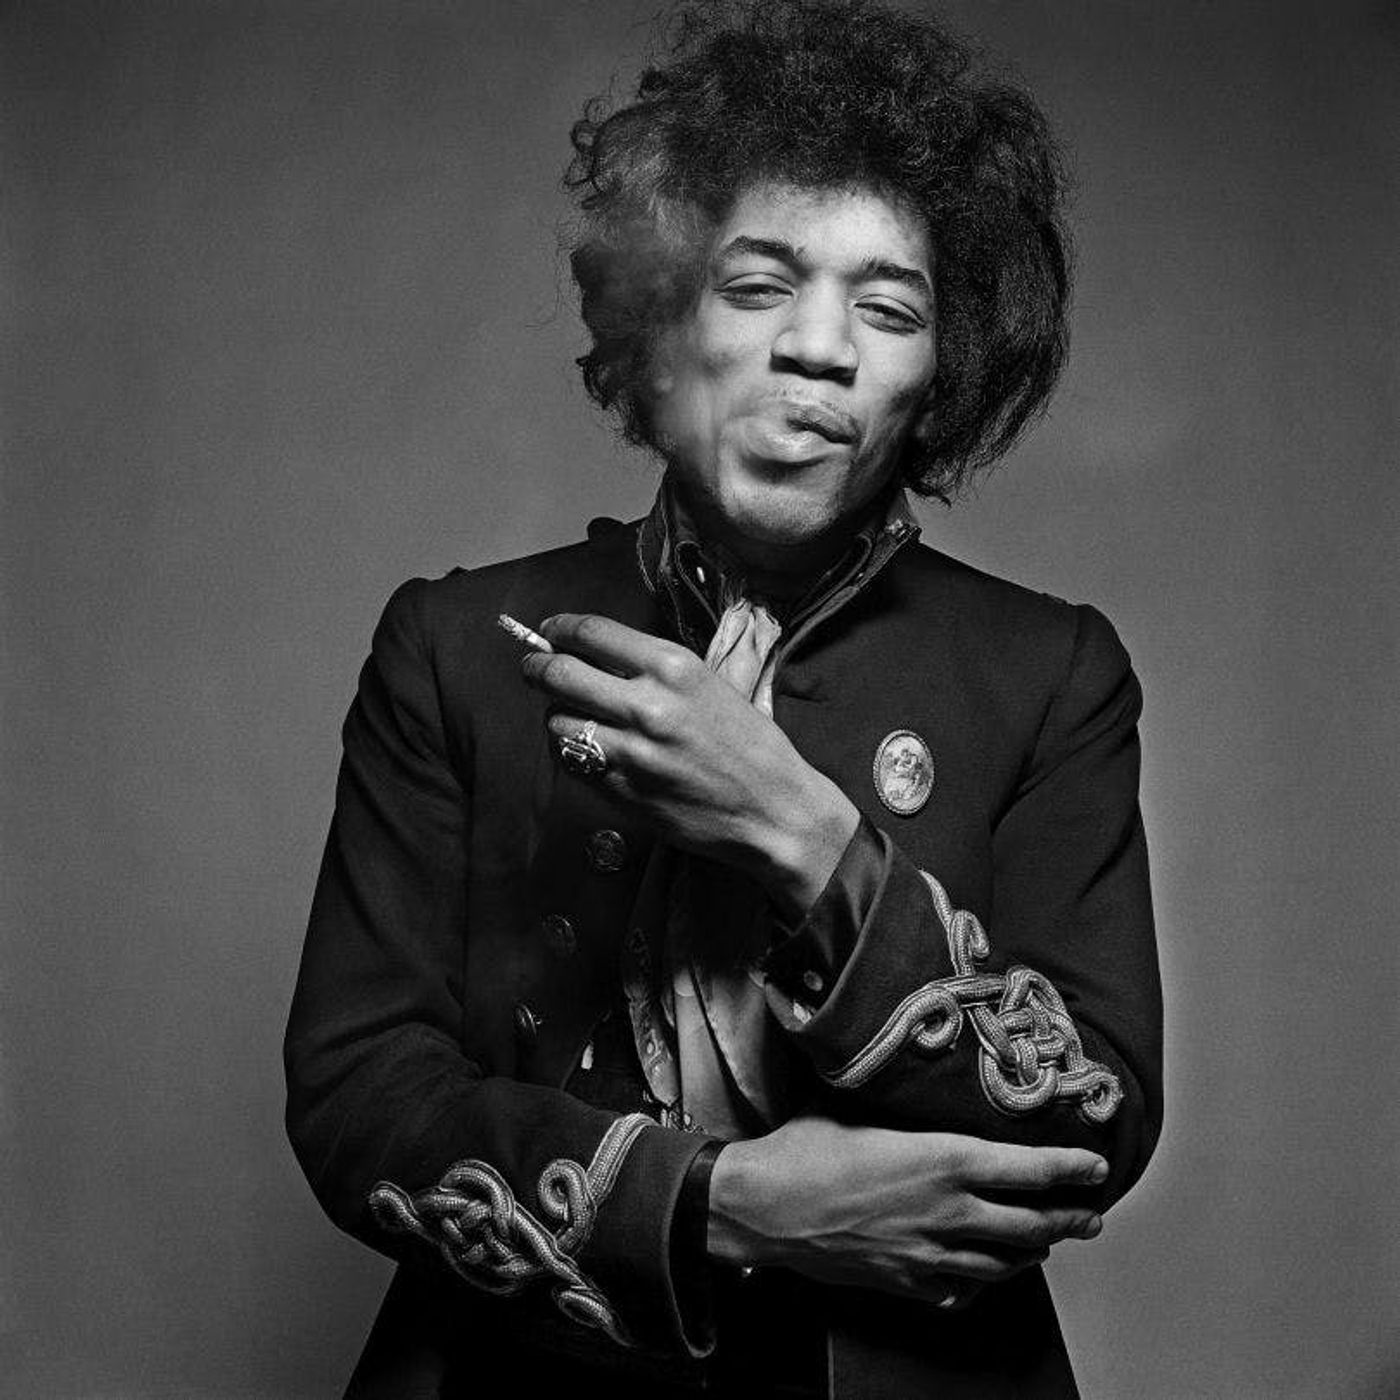 Part 1 of 2 - The Death of Jimi Hendrix